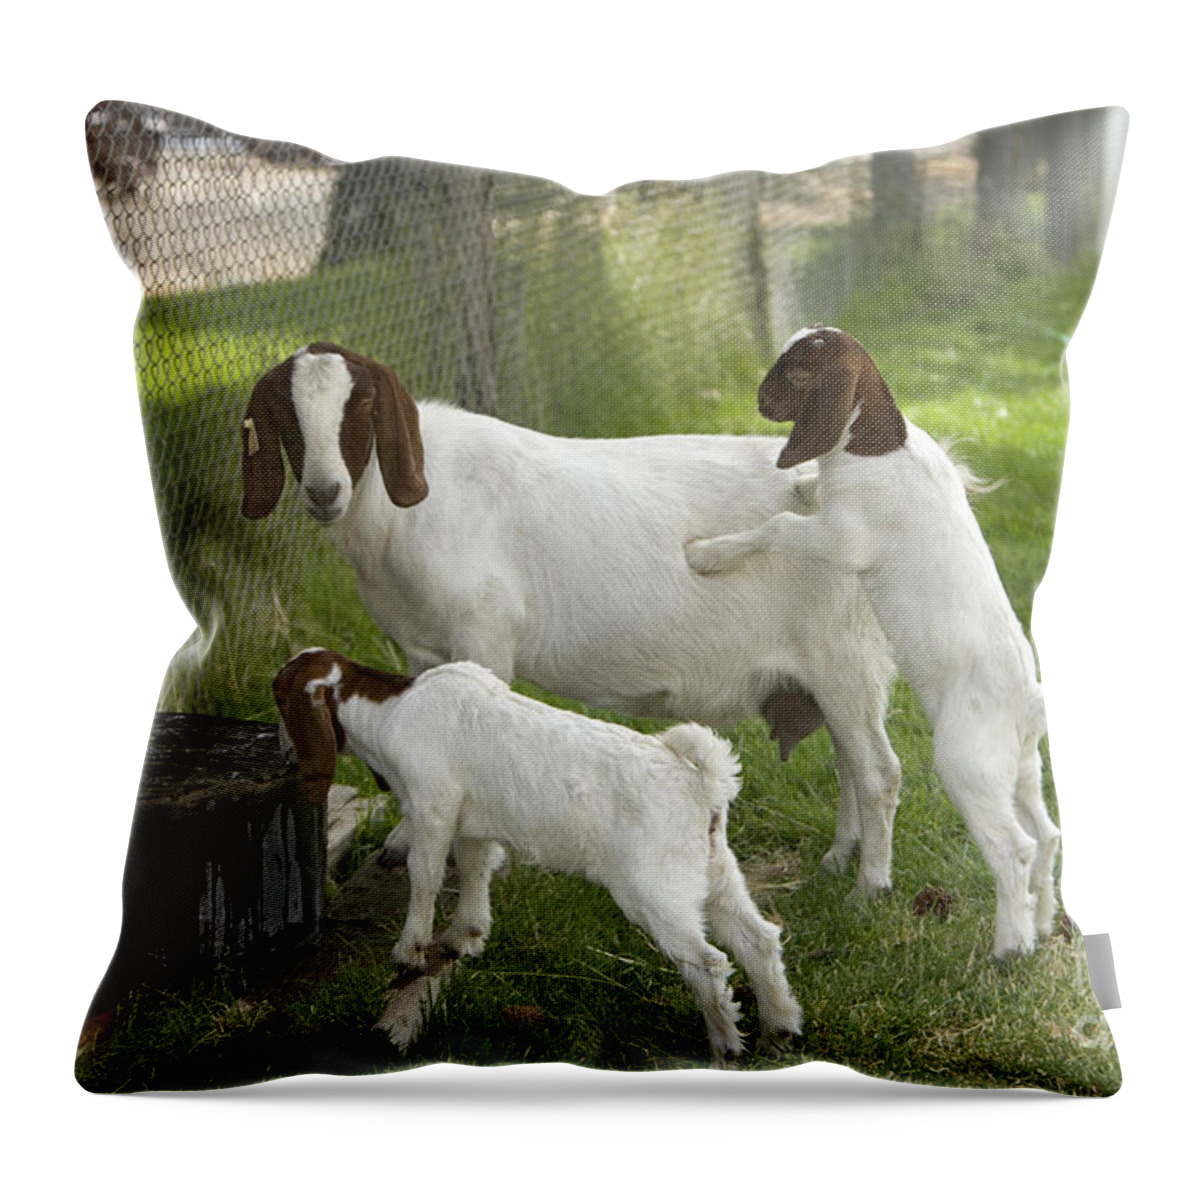 Boer Goat Throw Pillow featuring the photograph Goat With Kids by Inga Spence